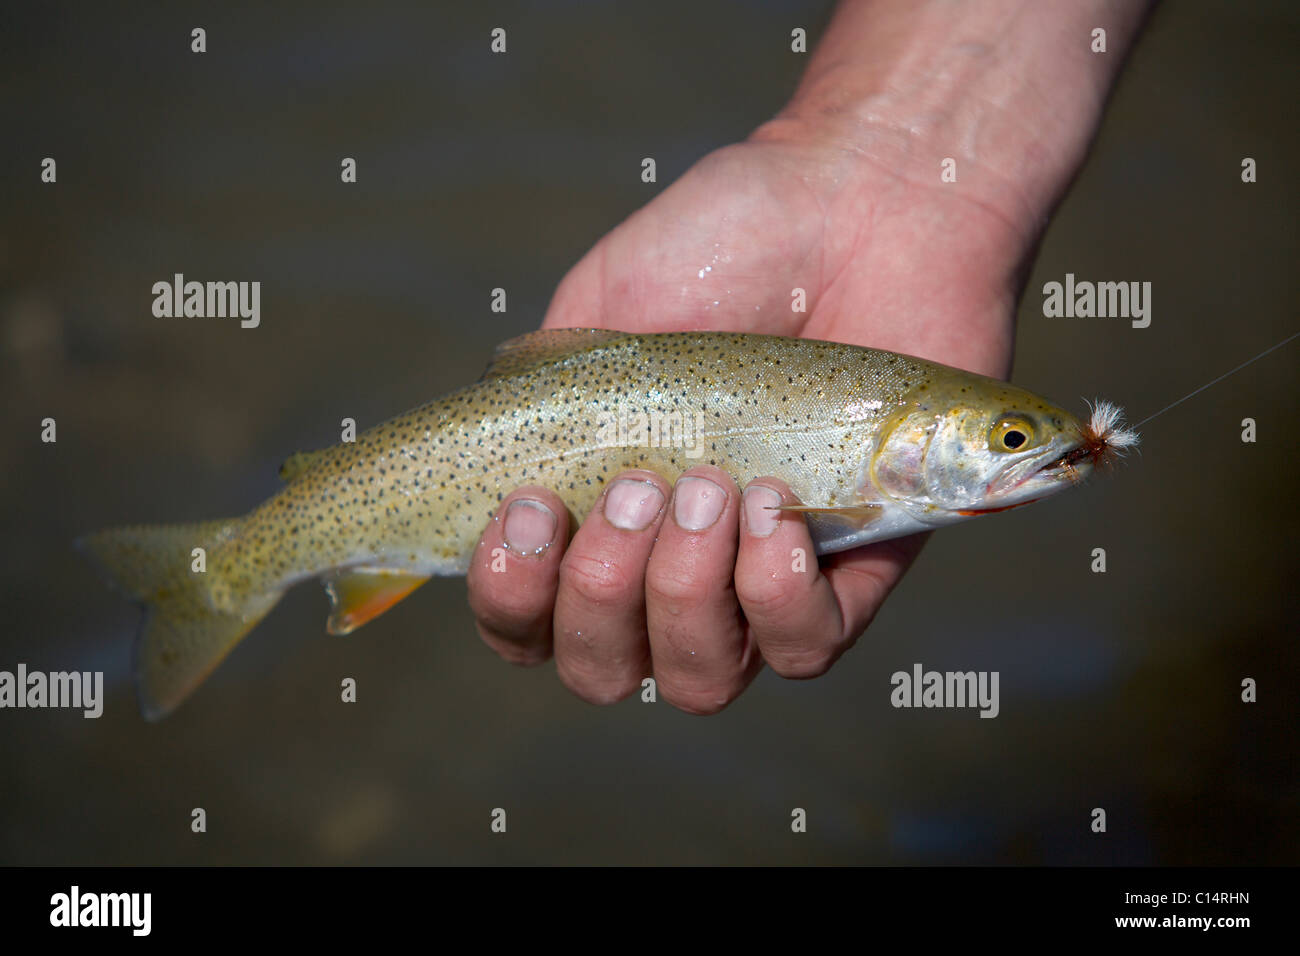 A hand holds a freshly caught cutthroat trout. Stock Photo